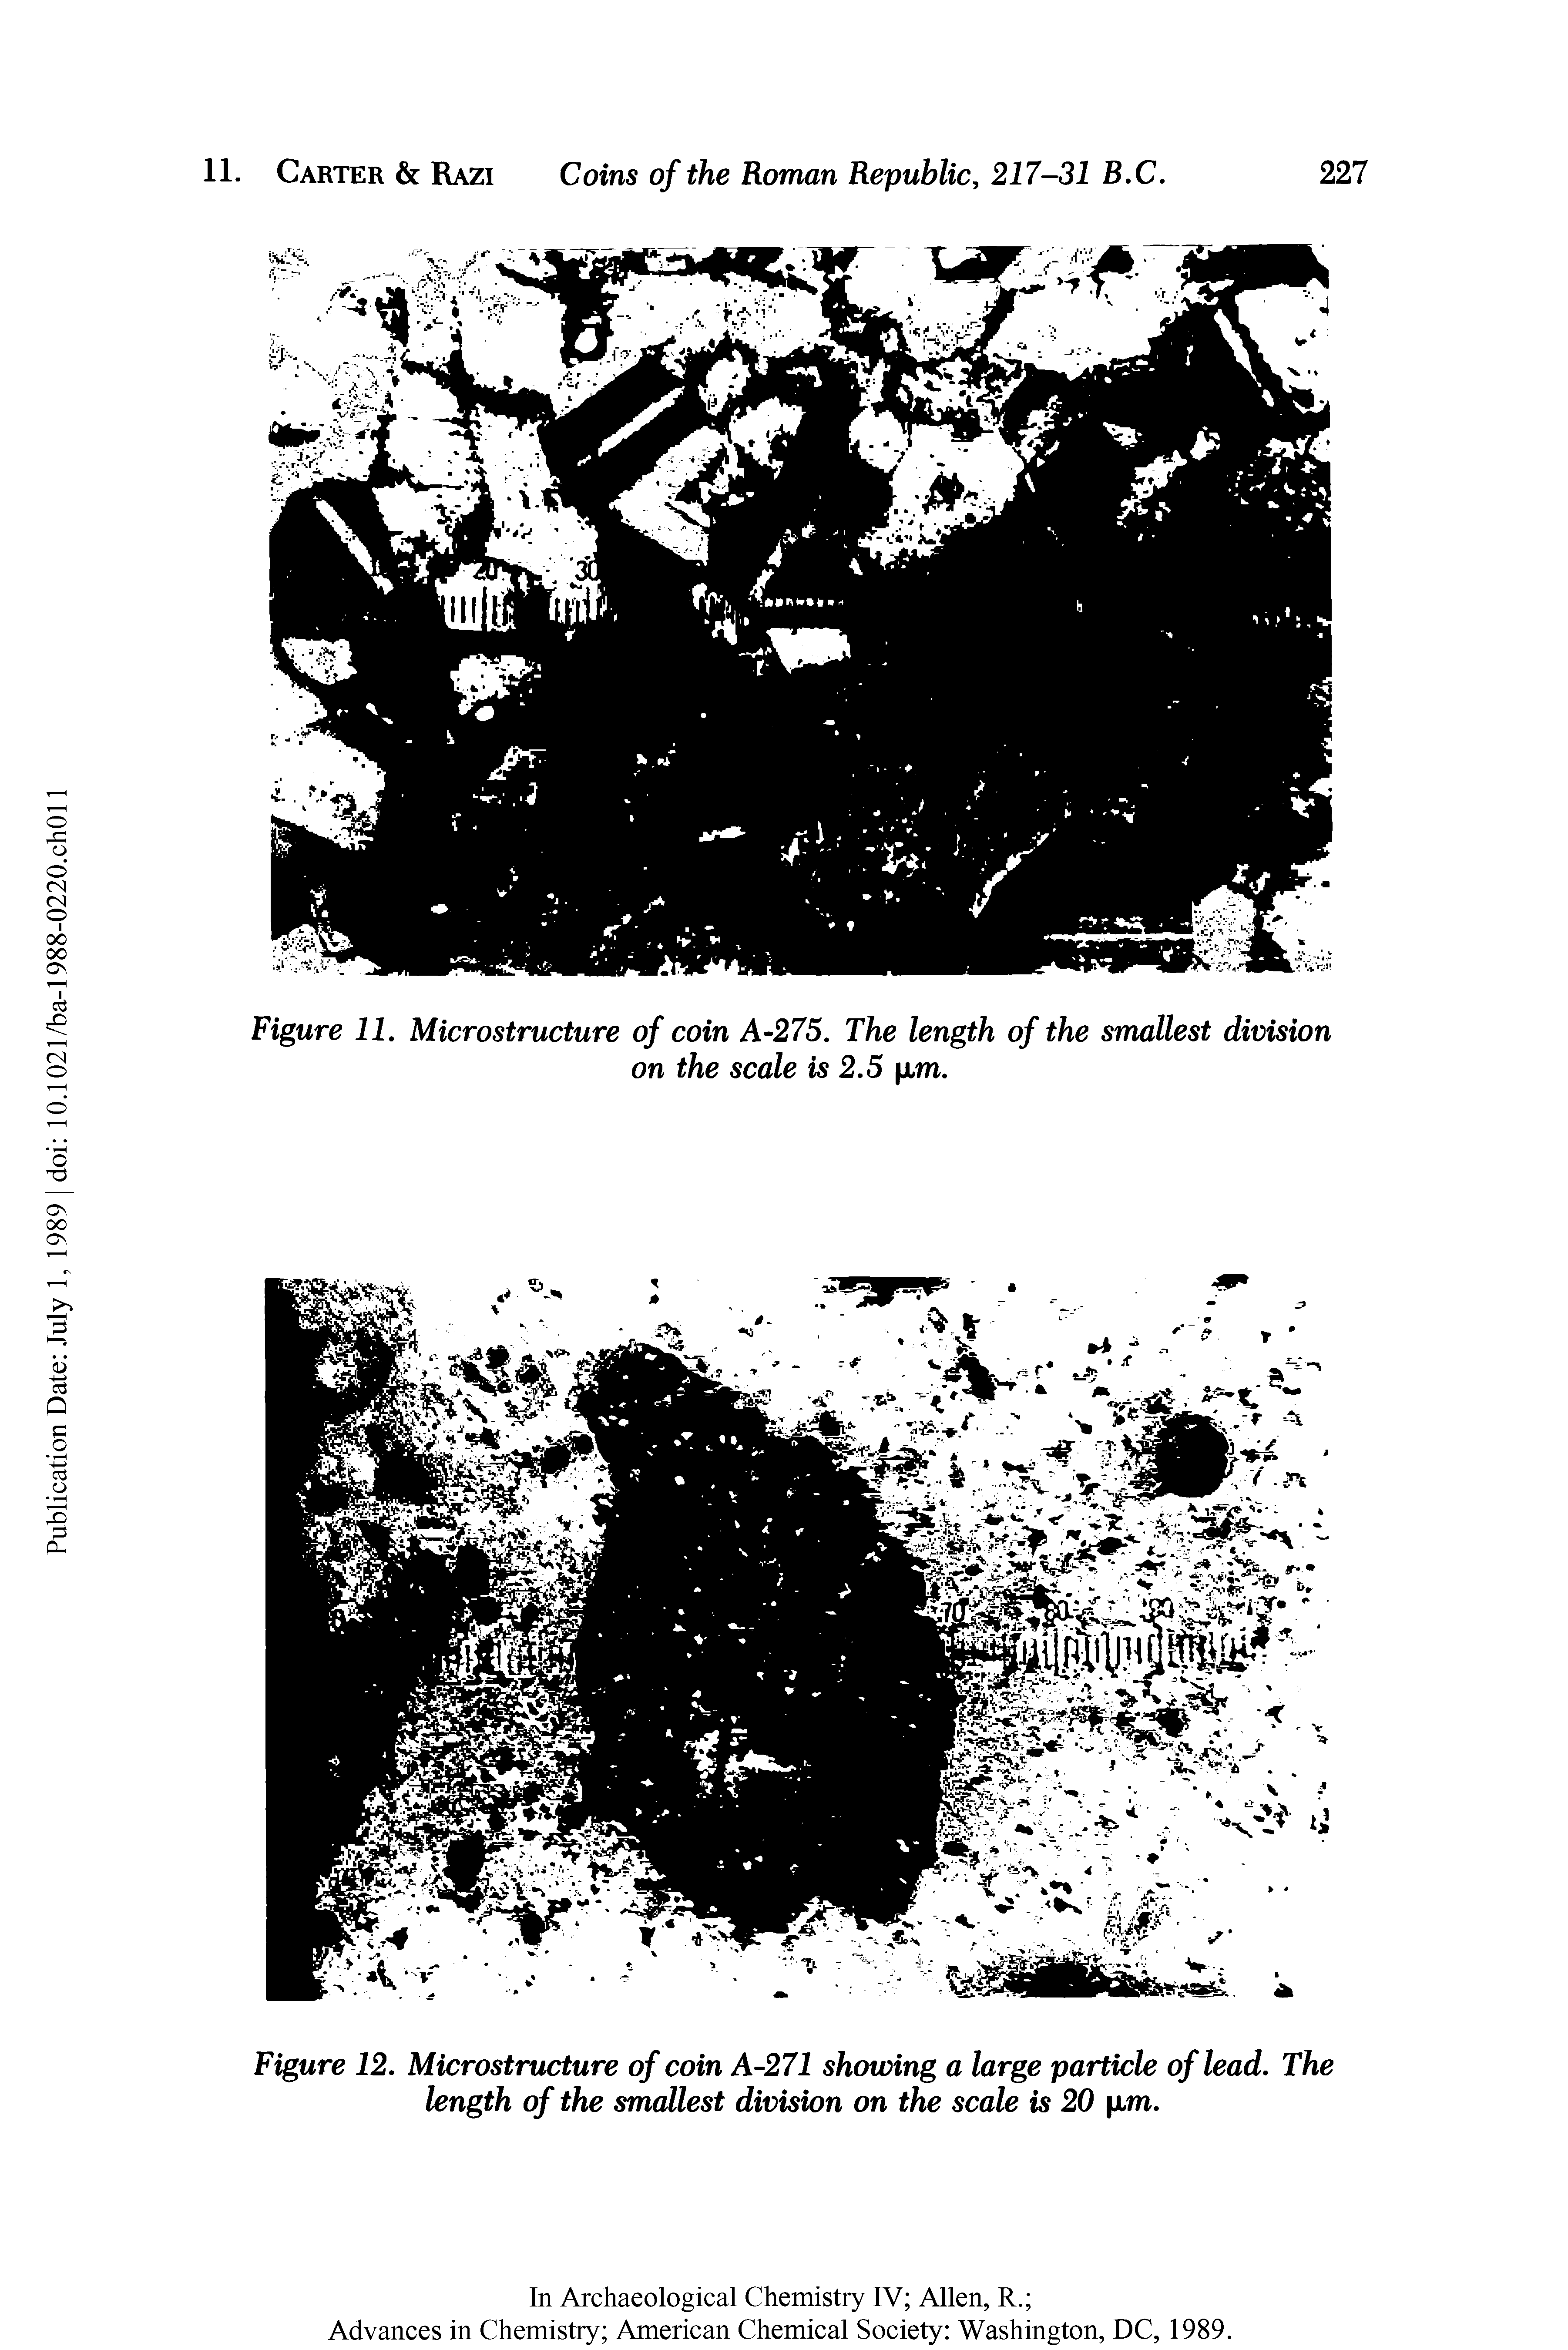 Figure 12. Microstructure of coin A-271 showing a large particle of lead. The length of the smallest division on the scale is 20 pm.